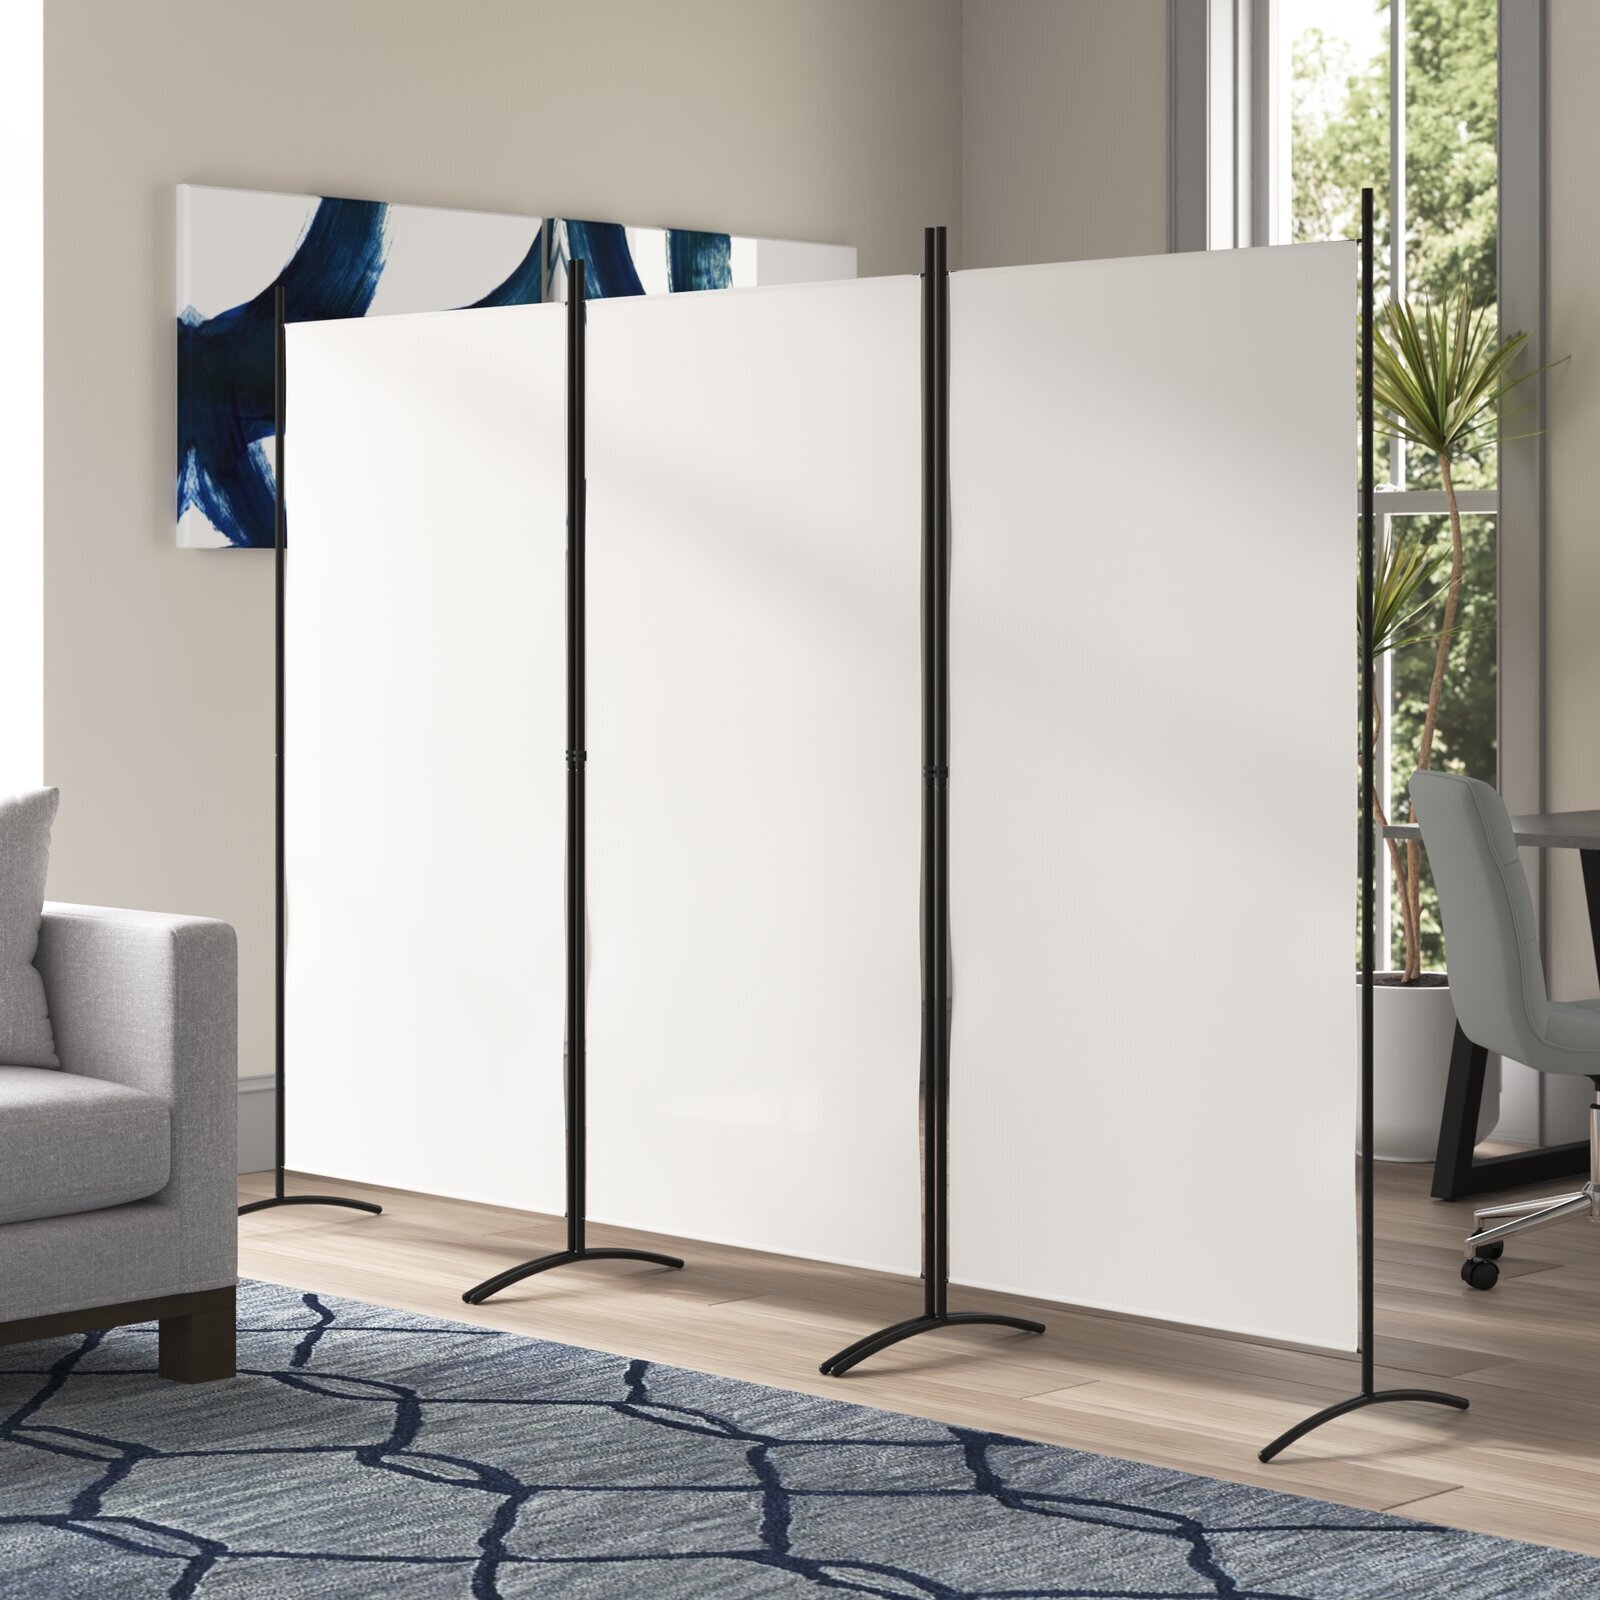 Simple and Effective Fixed Room Divider